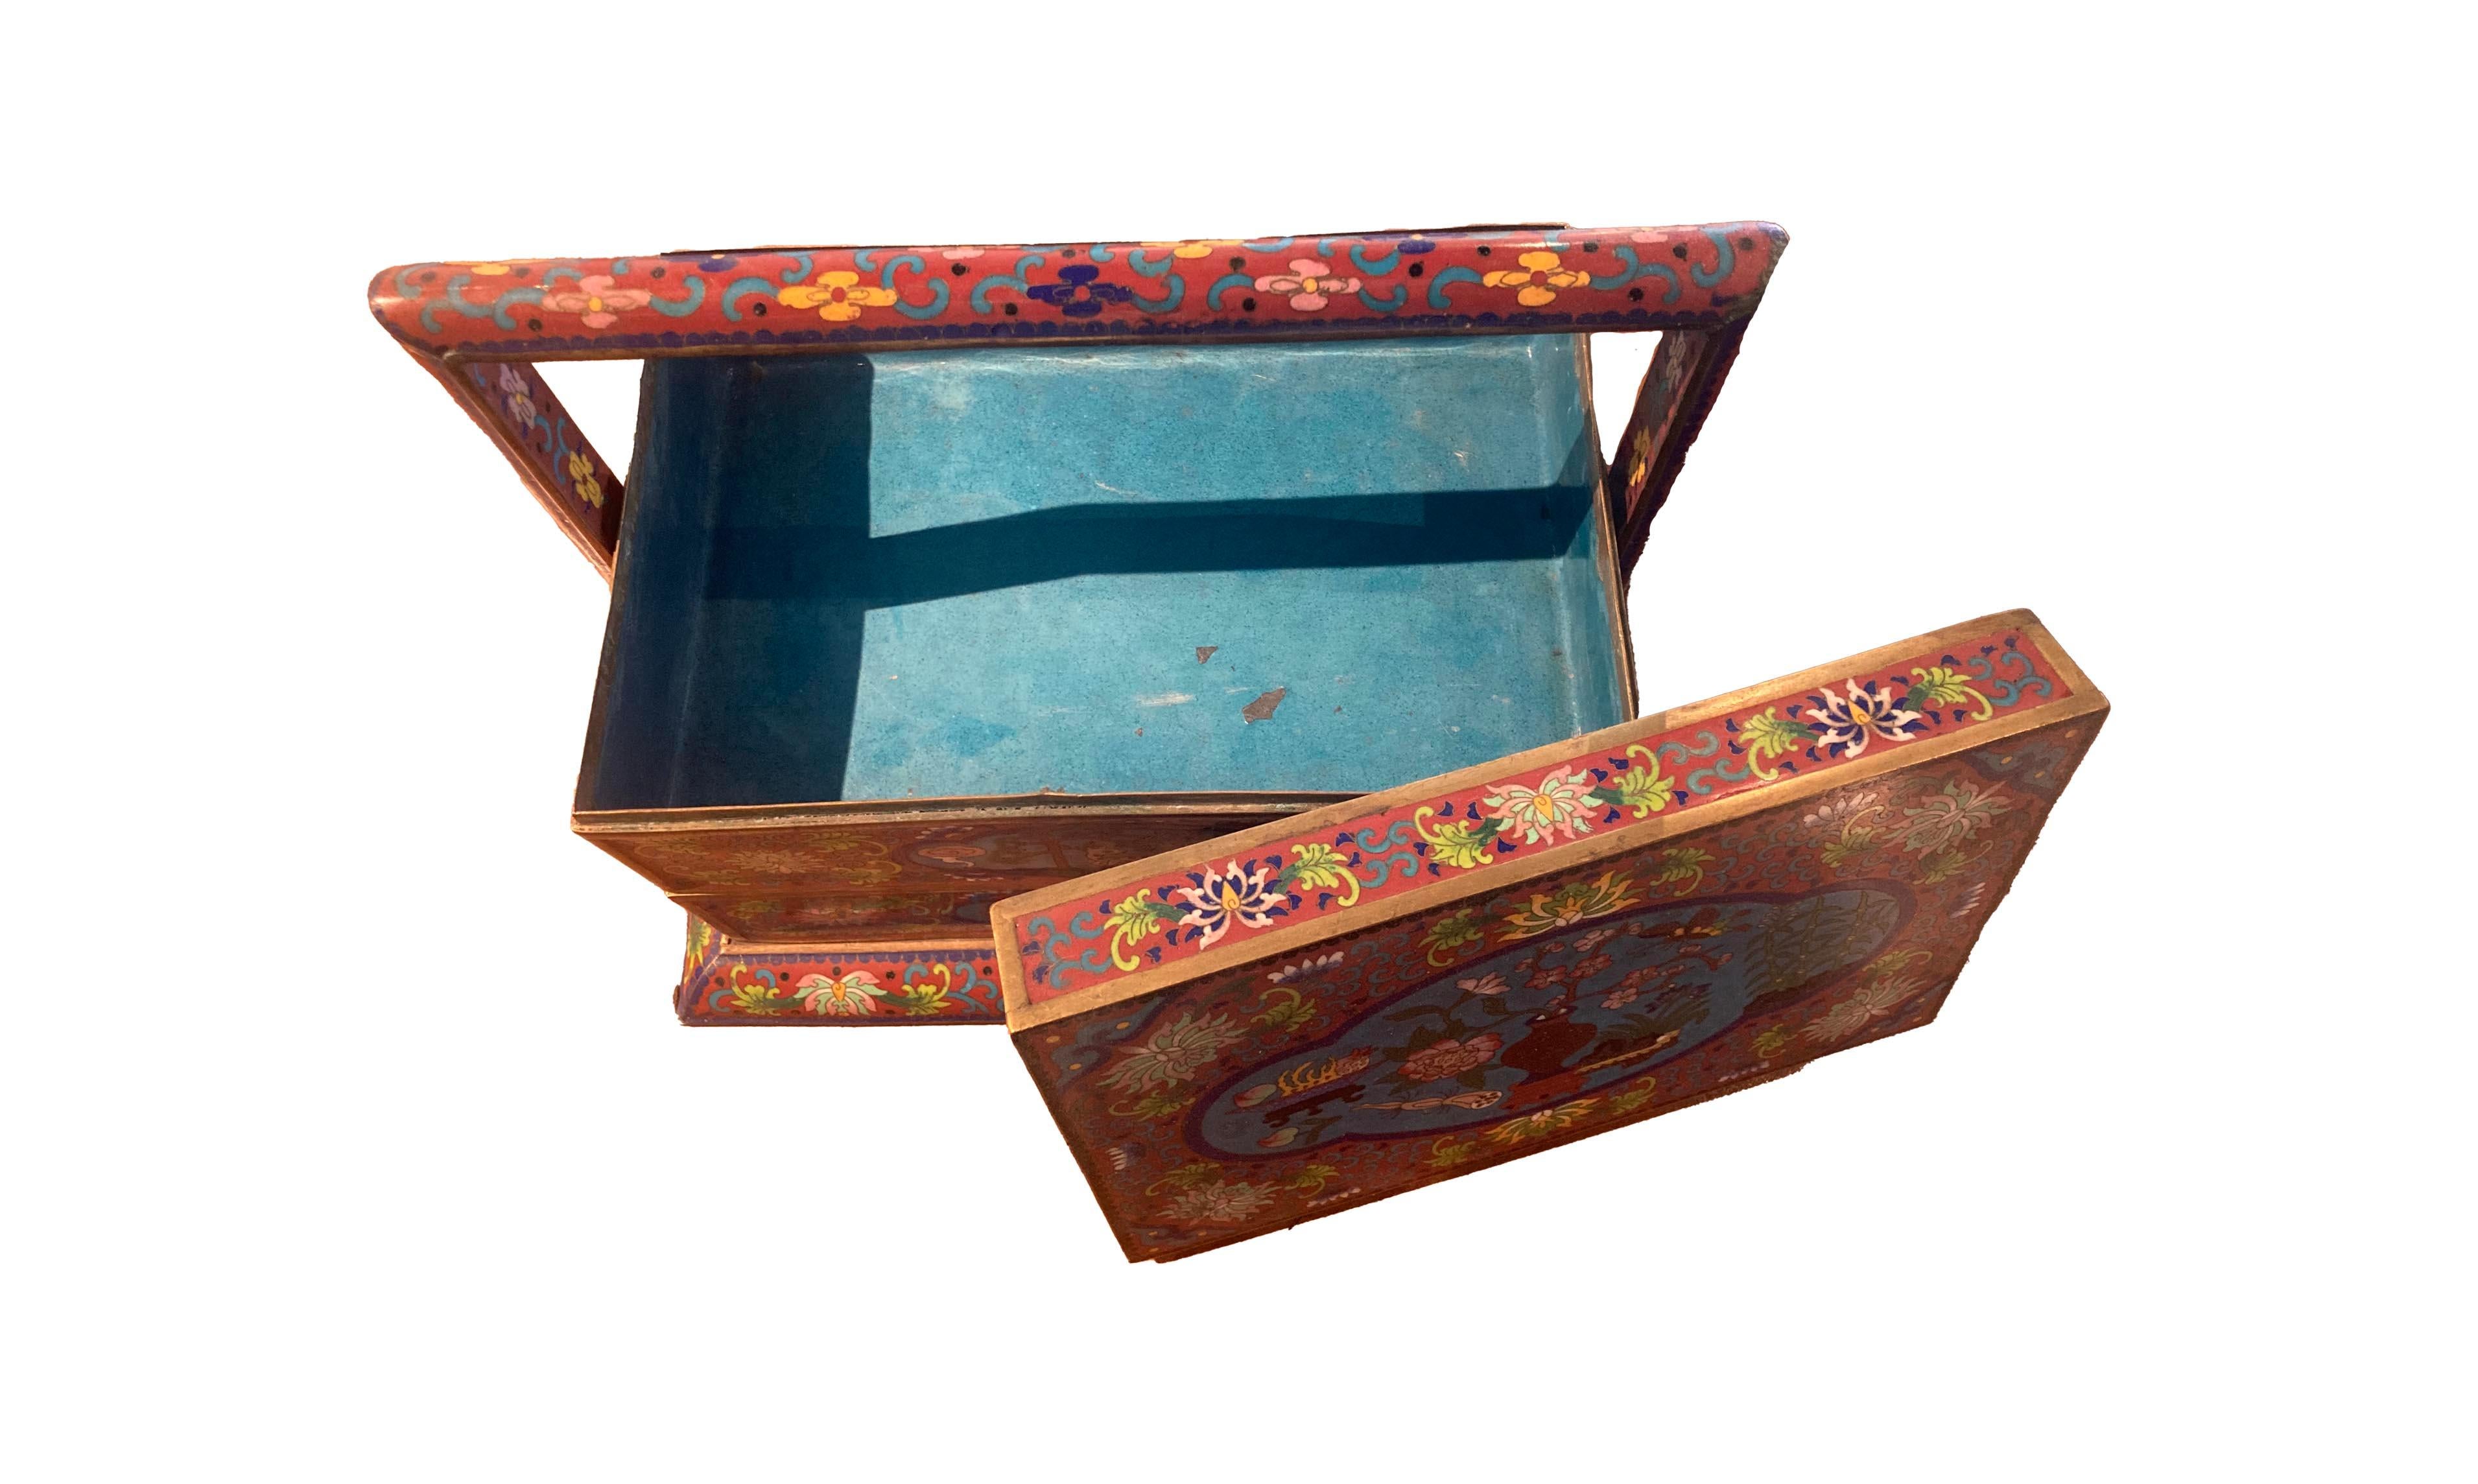 3-tiers of removable compartments create a large and unique cloisonne piece. Could have been used for storing tea or jewelry and features an elaborate colorful design with Chinese lotus and animals such as native Crane and a deer.